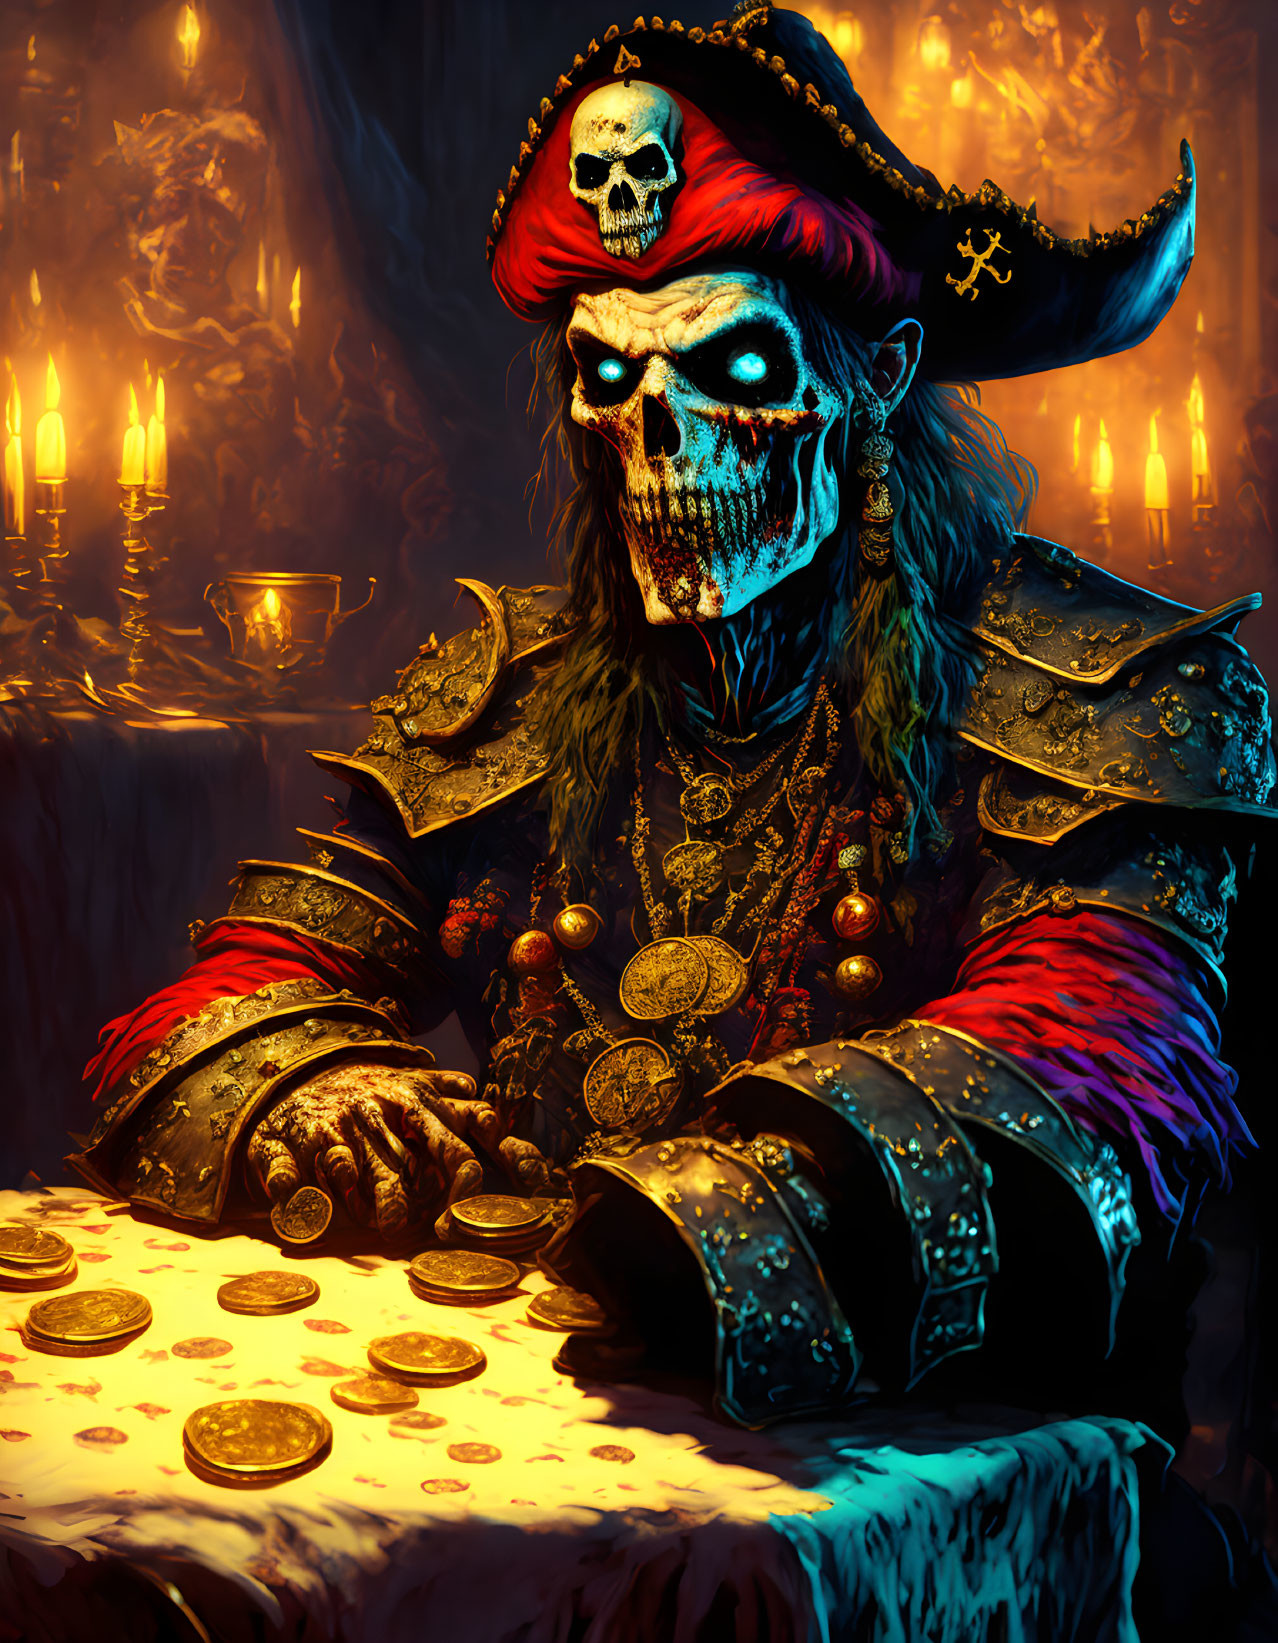 Skeletal pirate captain surrounded by gold coins and candles